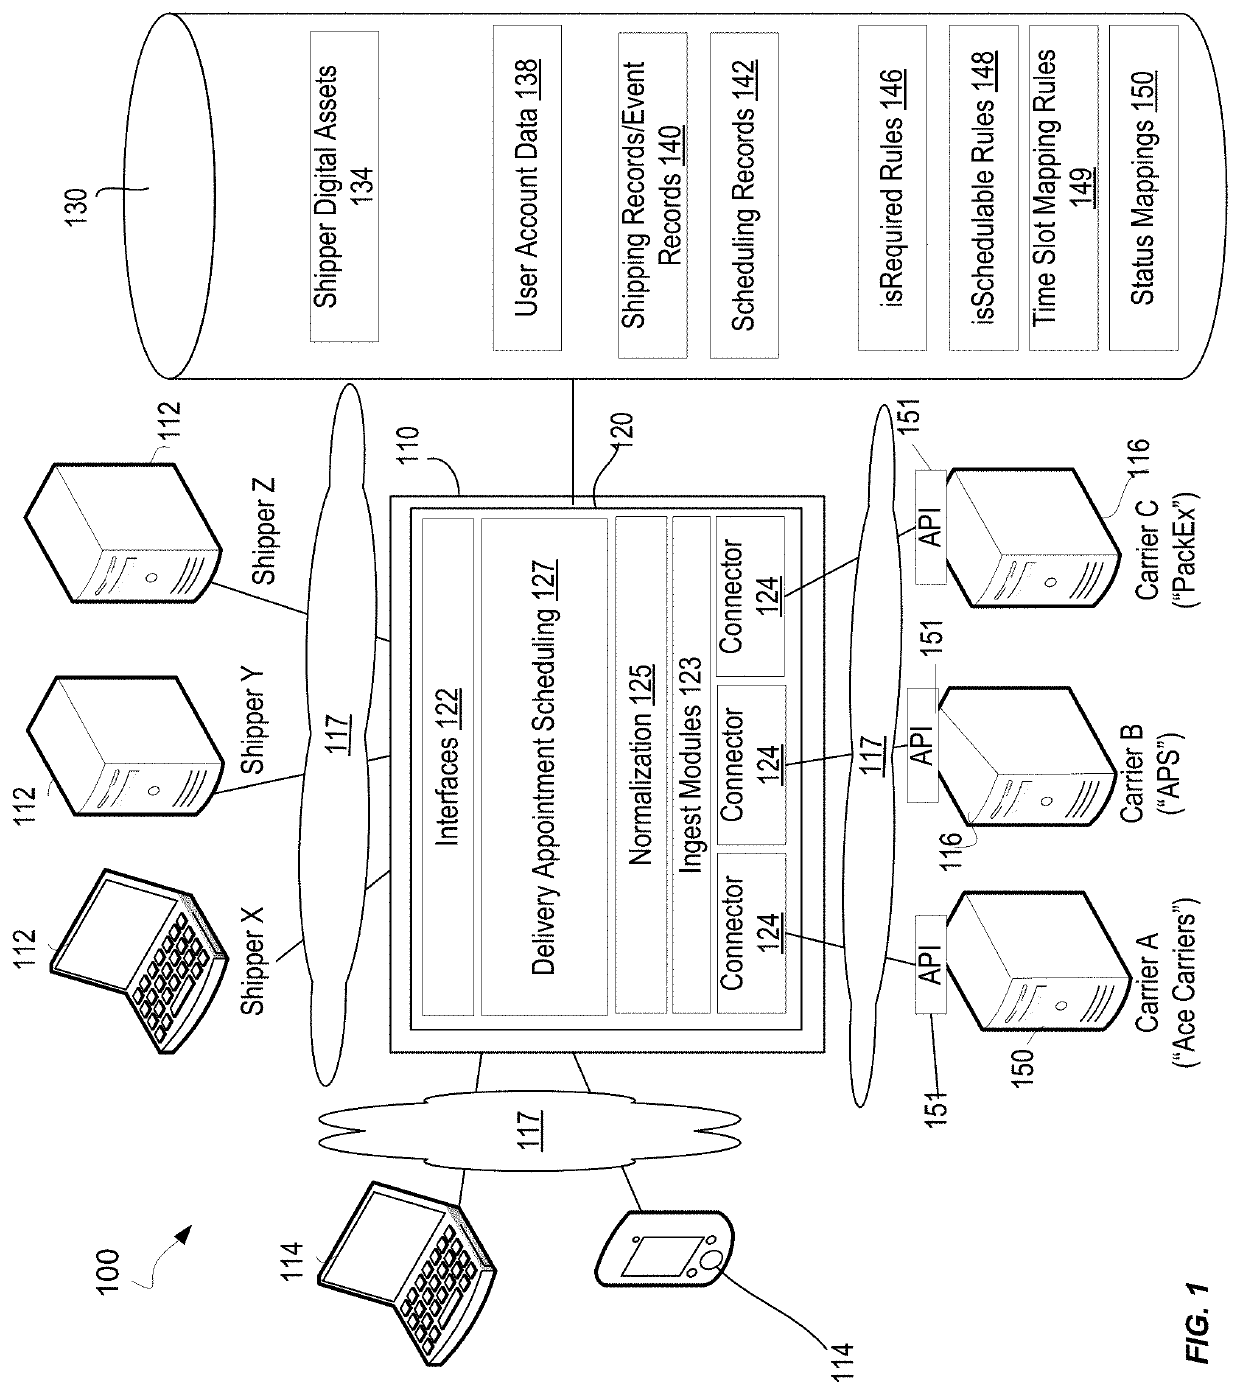 Intermediated shipping logistics system for facilitating delivery appointment scheduling with outsourced carrier systems